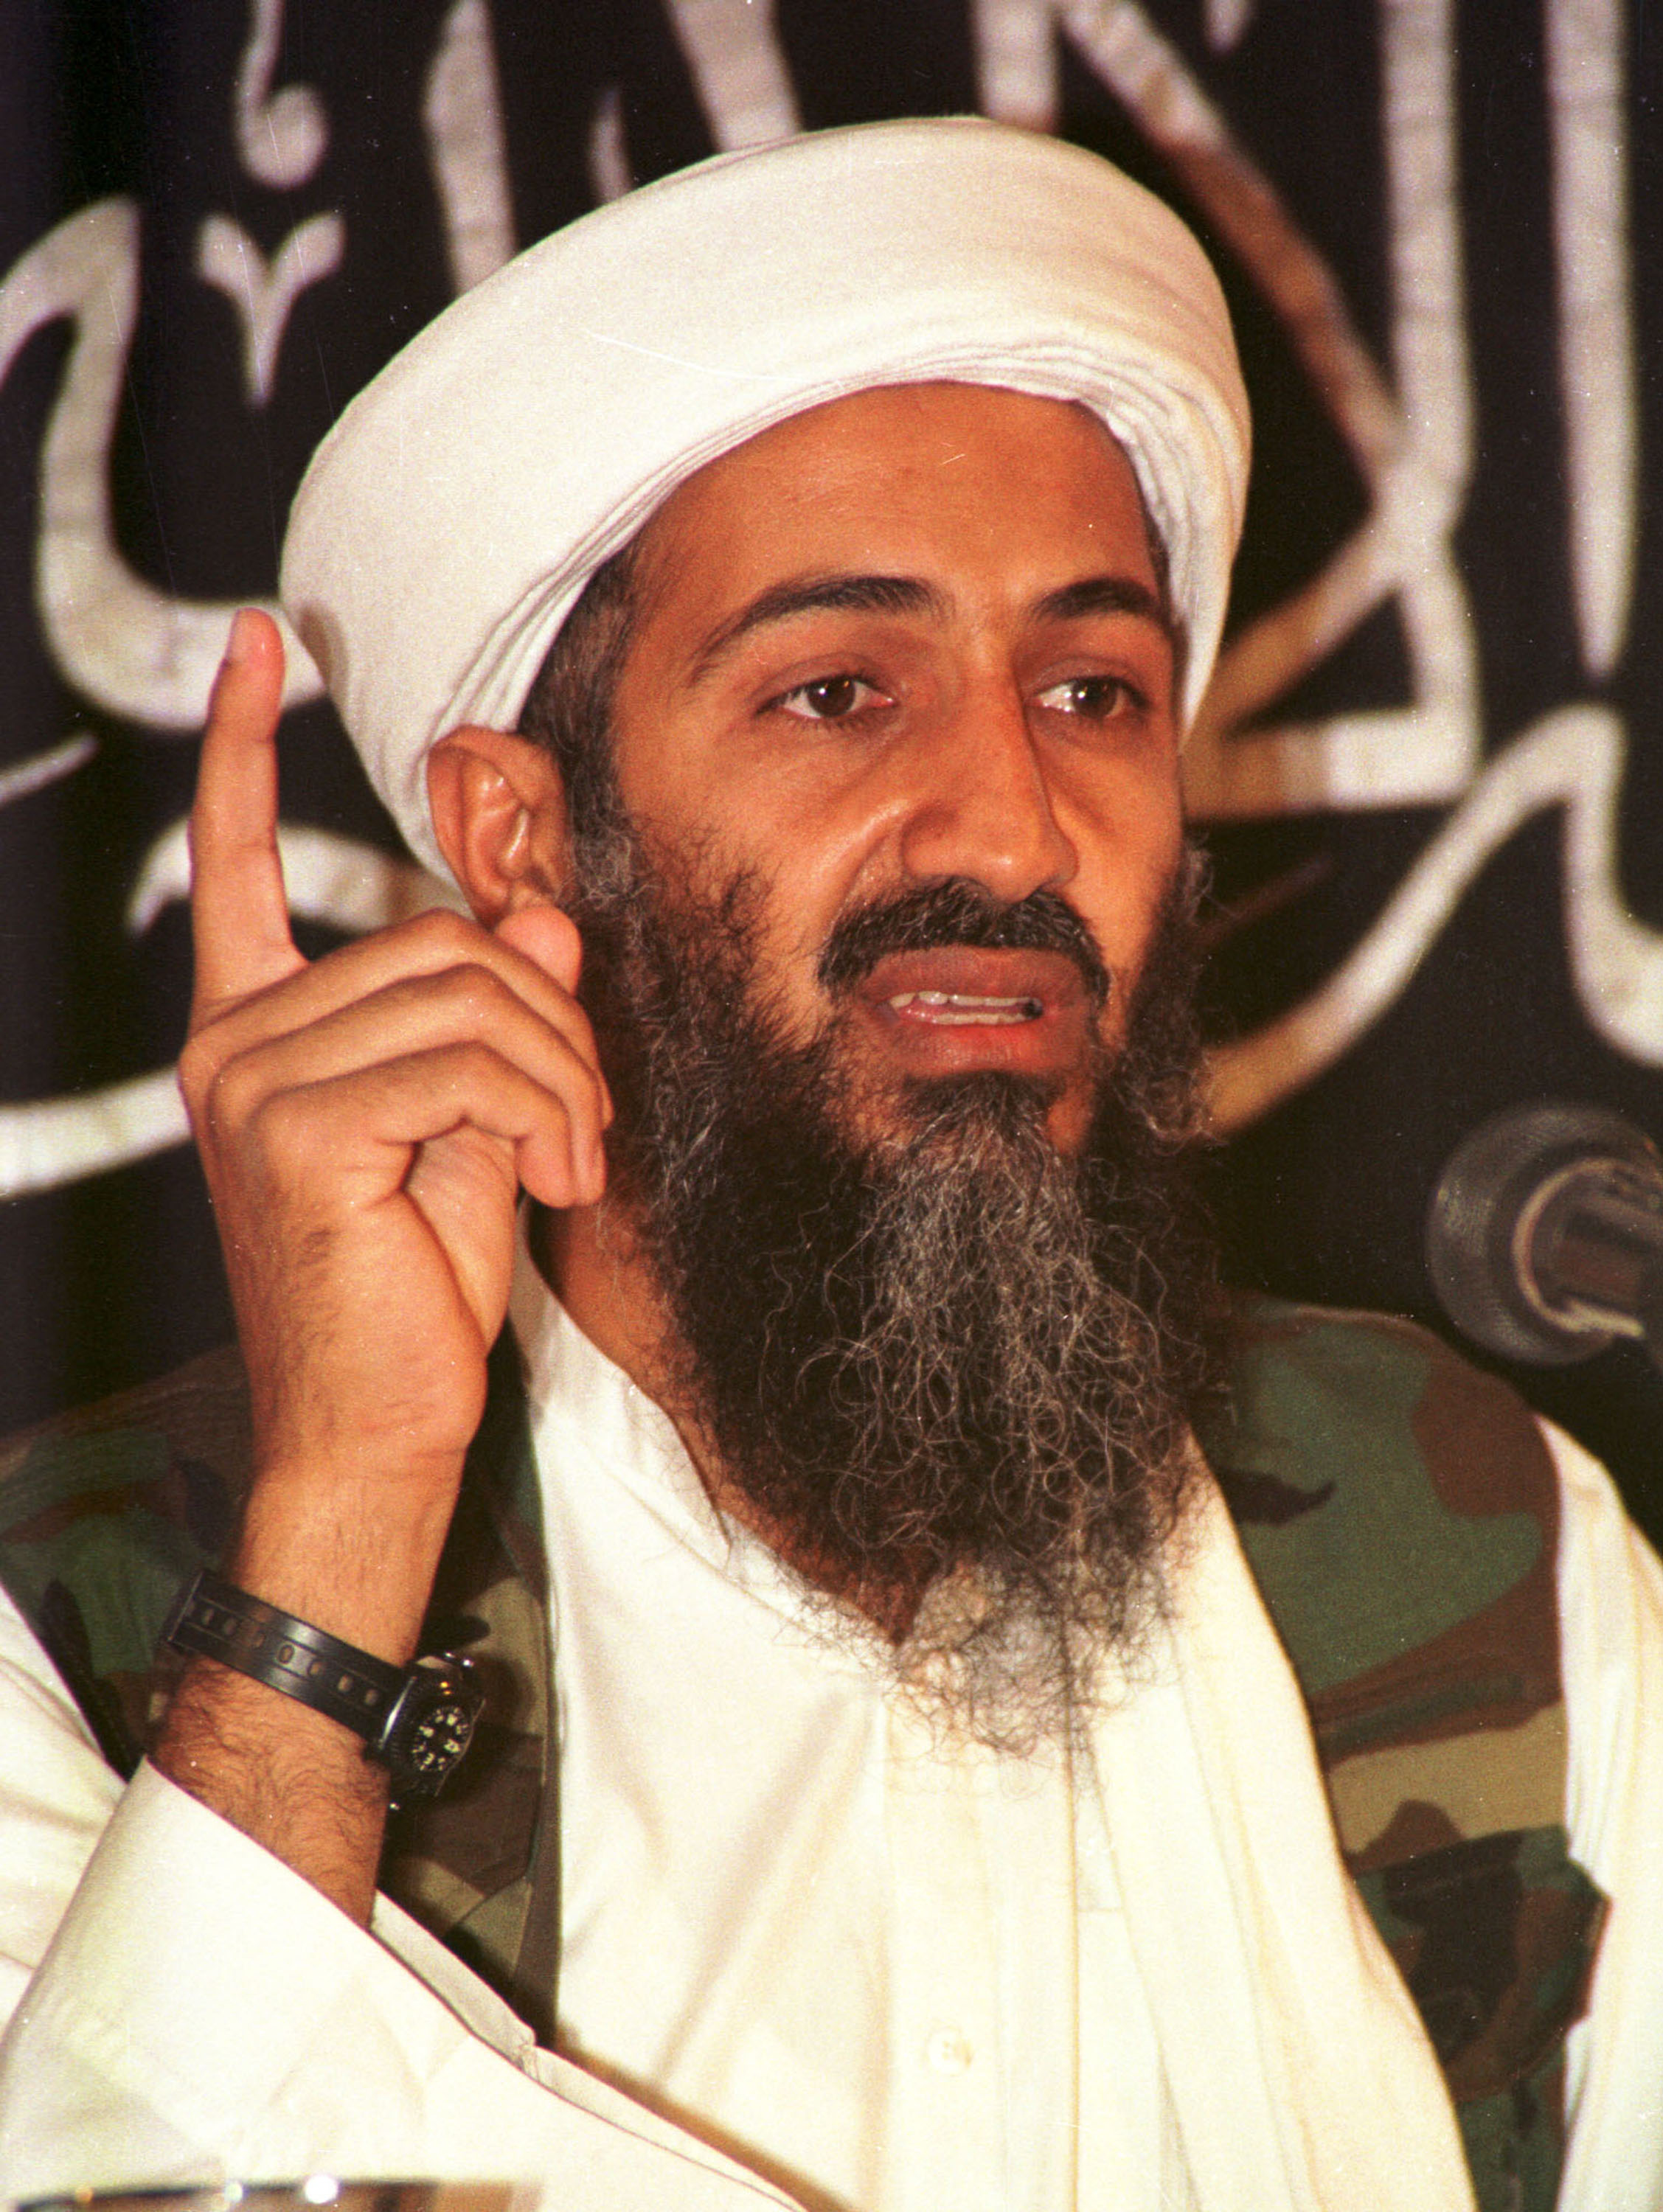 <b>$25 million: Osama bin-Laden</b> was the founder of al-Qaeda, the militant Islamist organization that was responsible for the September 11, 2001 attacks on the U.S.  Bin-Laden was killed in Pakistan on May 2, 2011 by an American Special Forces unit in an operation ordered by President Obama. (Getty Images)